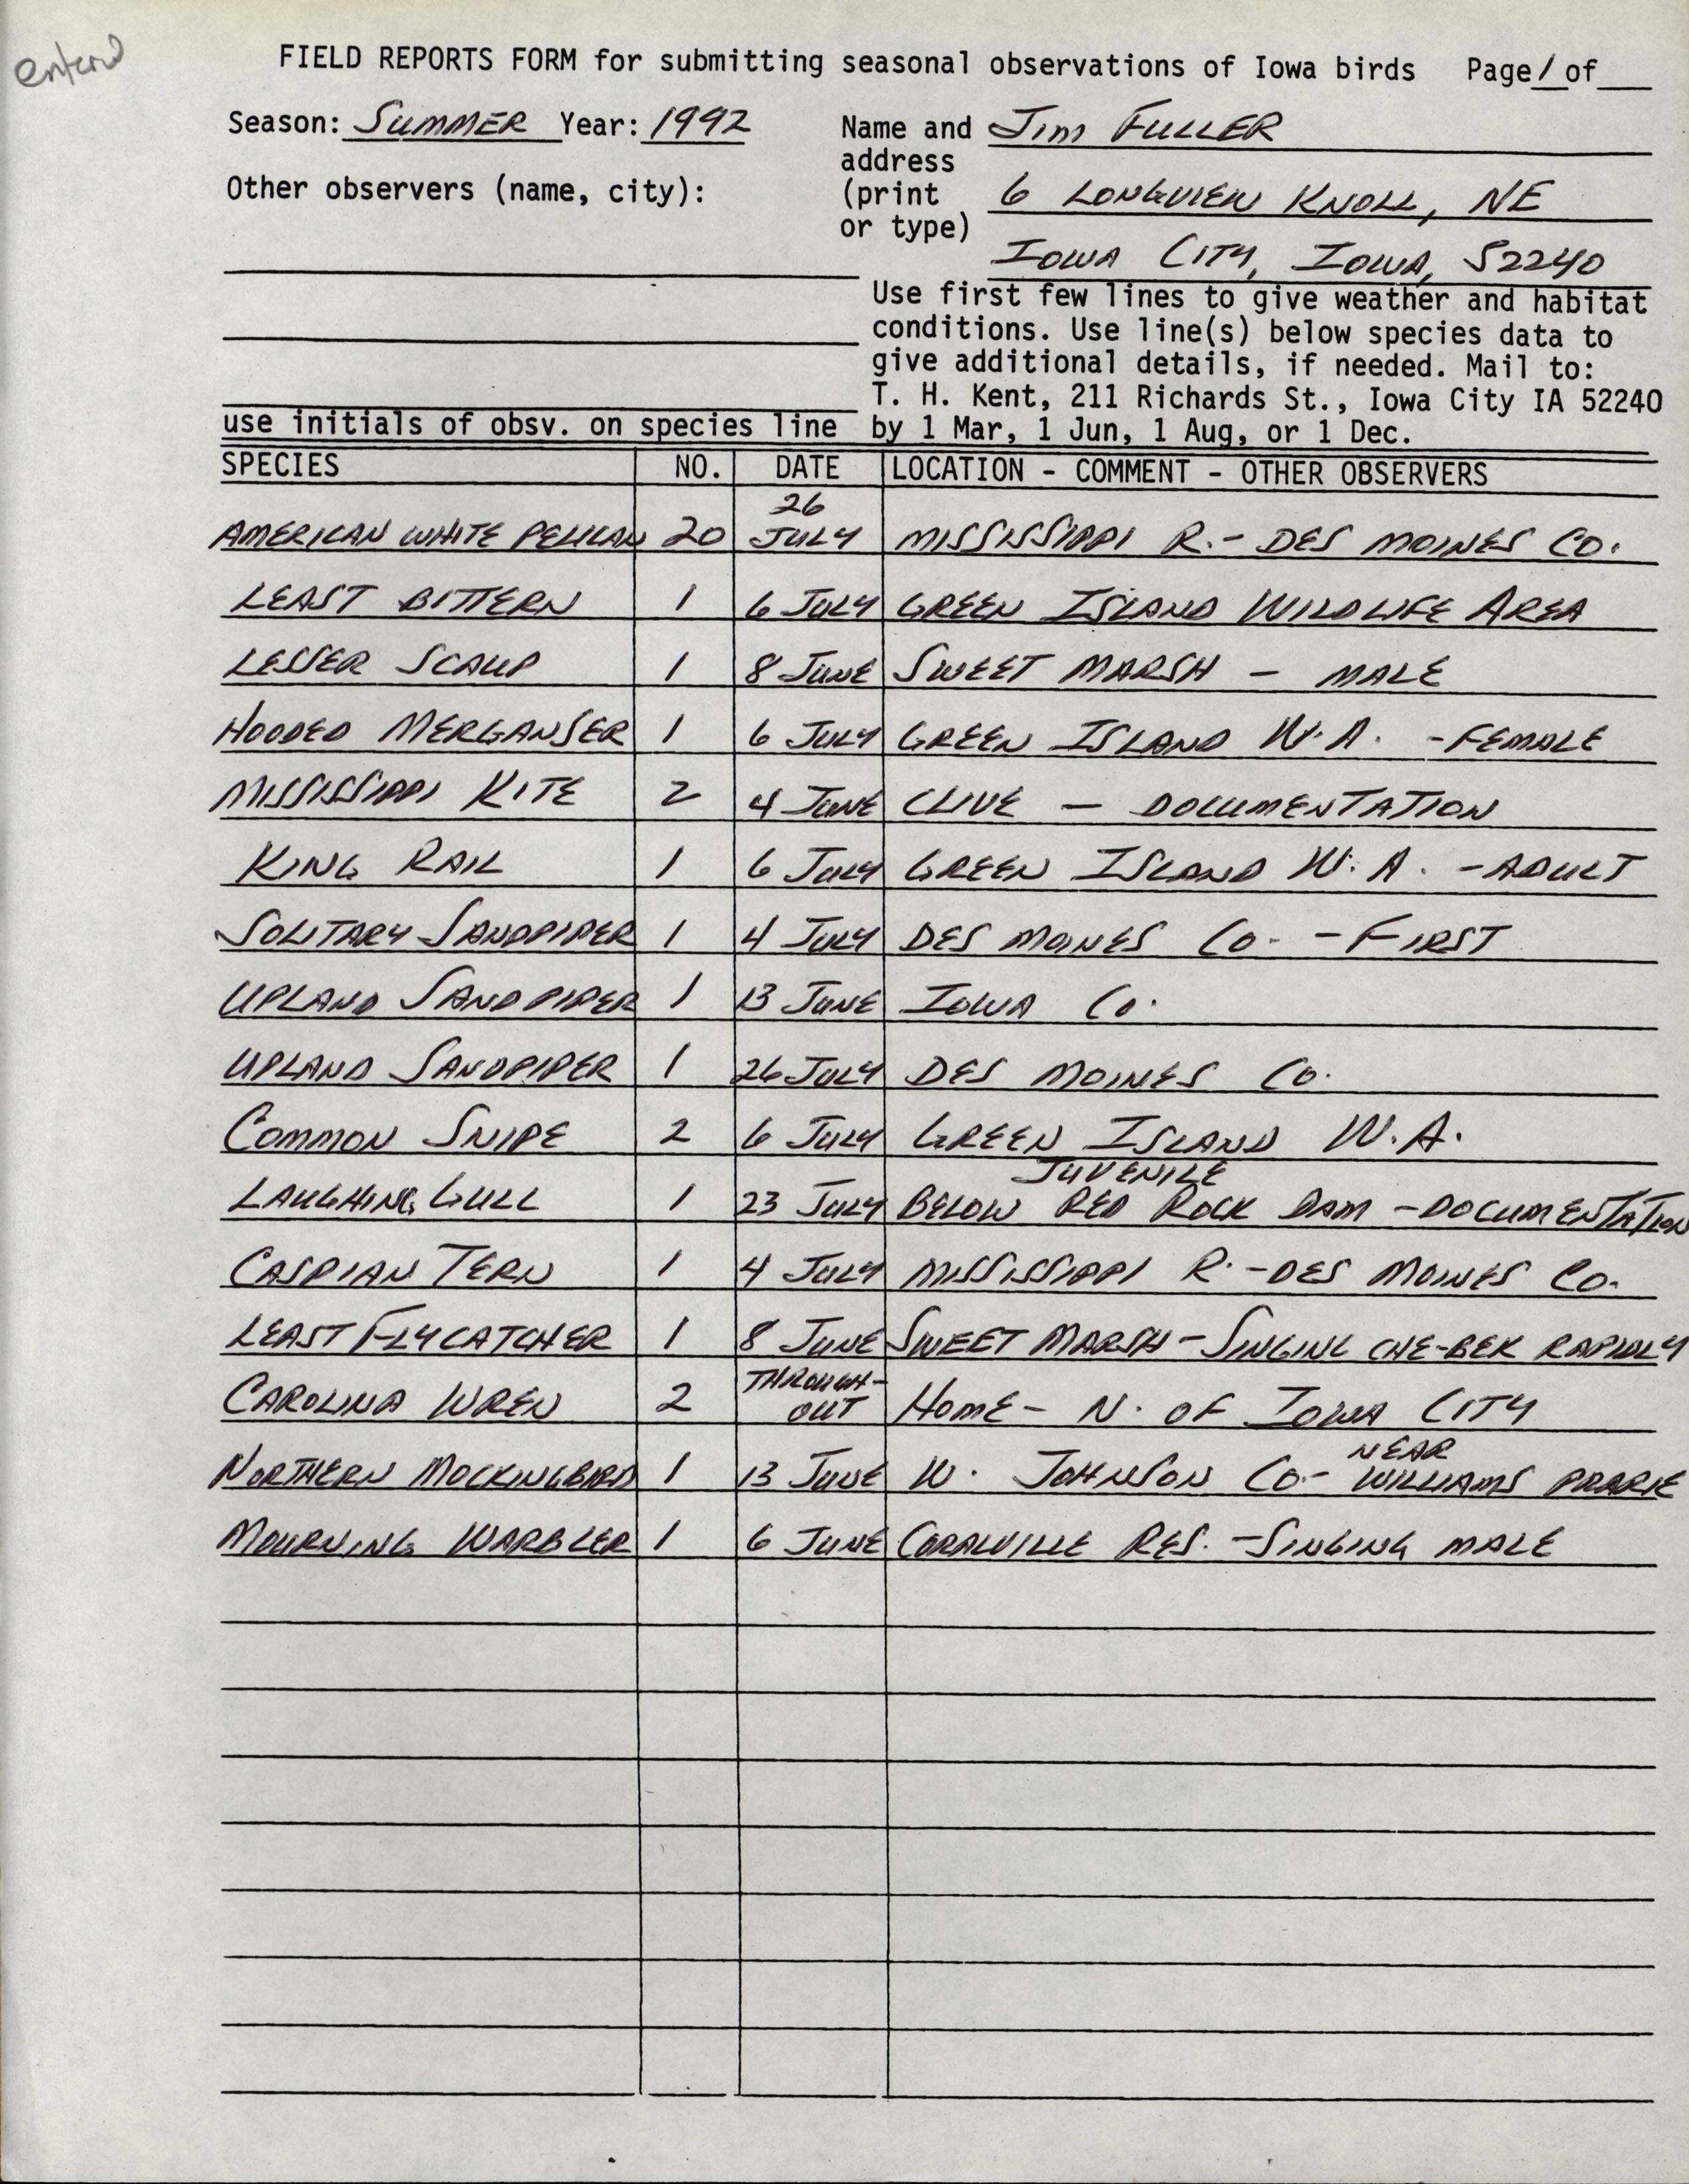 Field reports form for submitting seasonal observations of Iowa birds, James L. Fuller, summer 1992